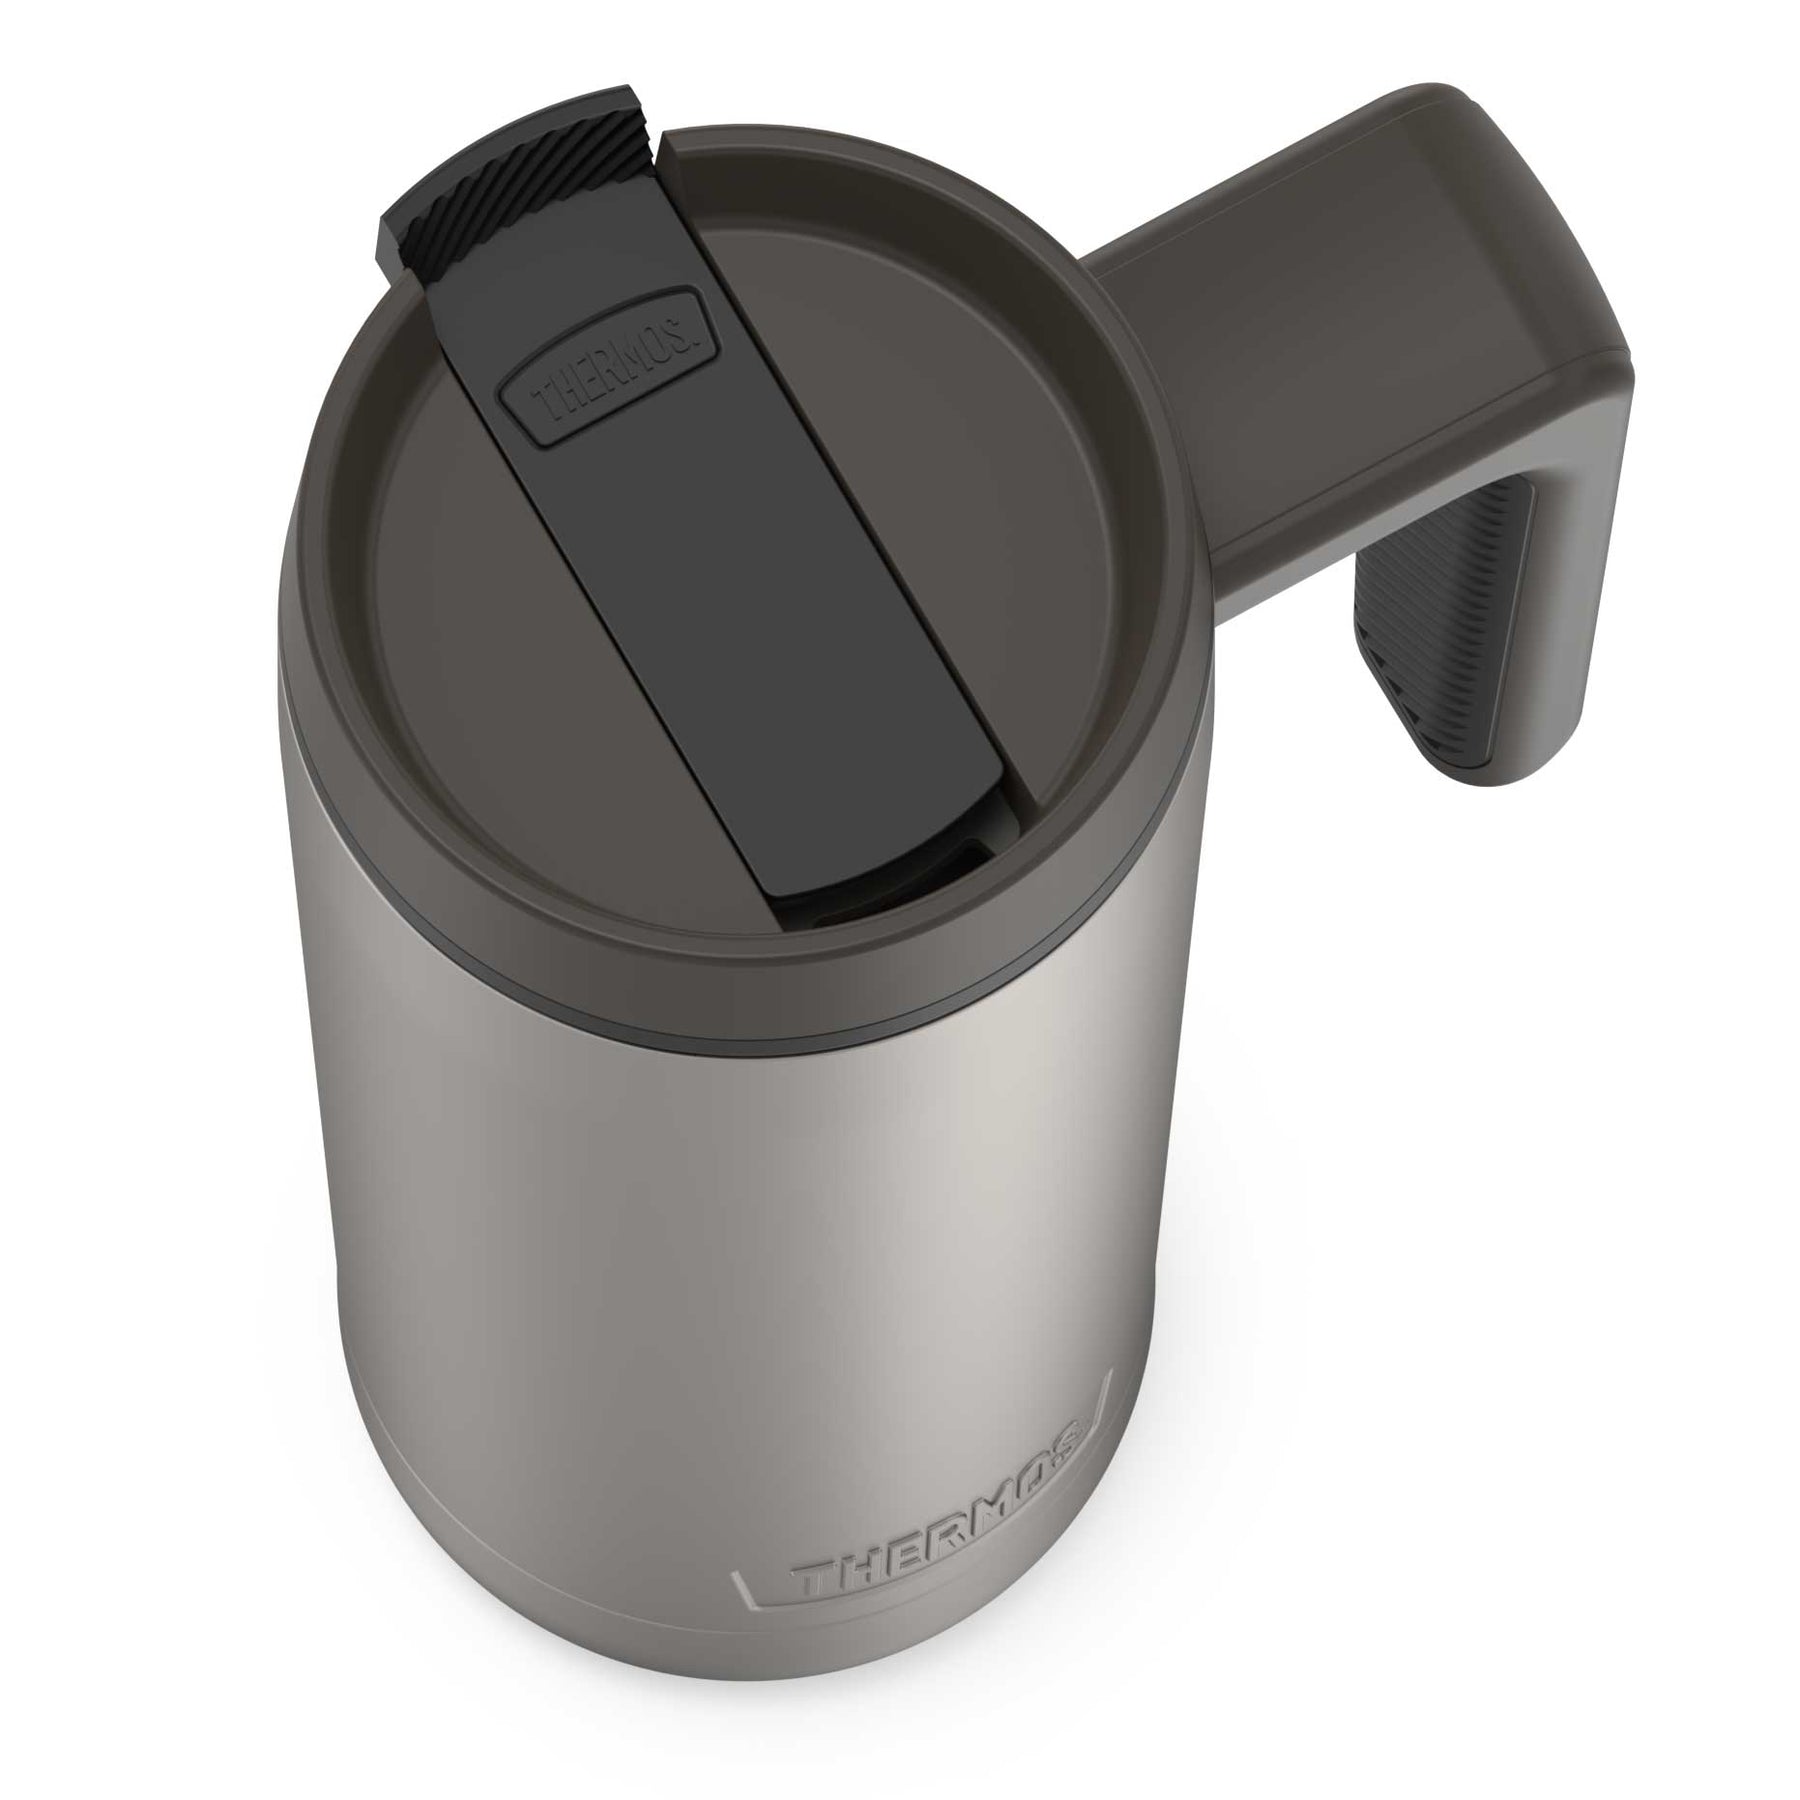 Thermos Thermal Travel Tumbler 18Oz 2- Pack